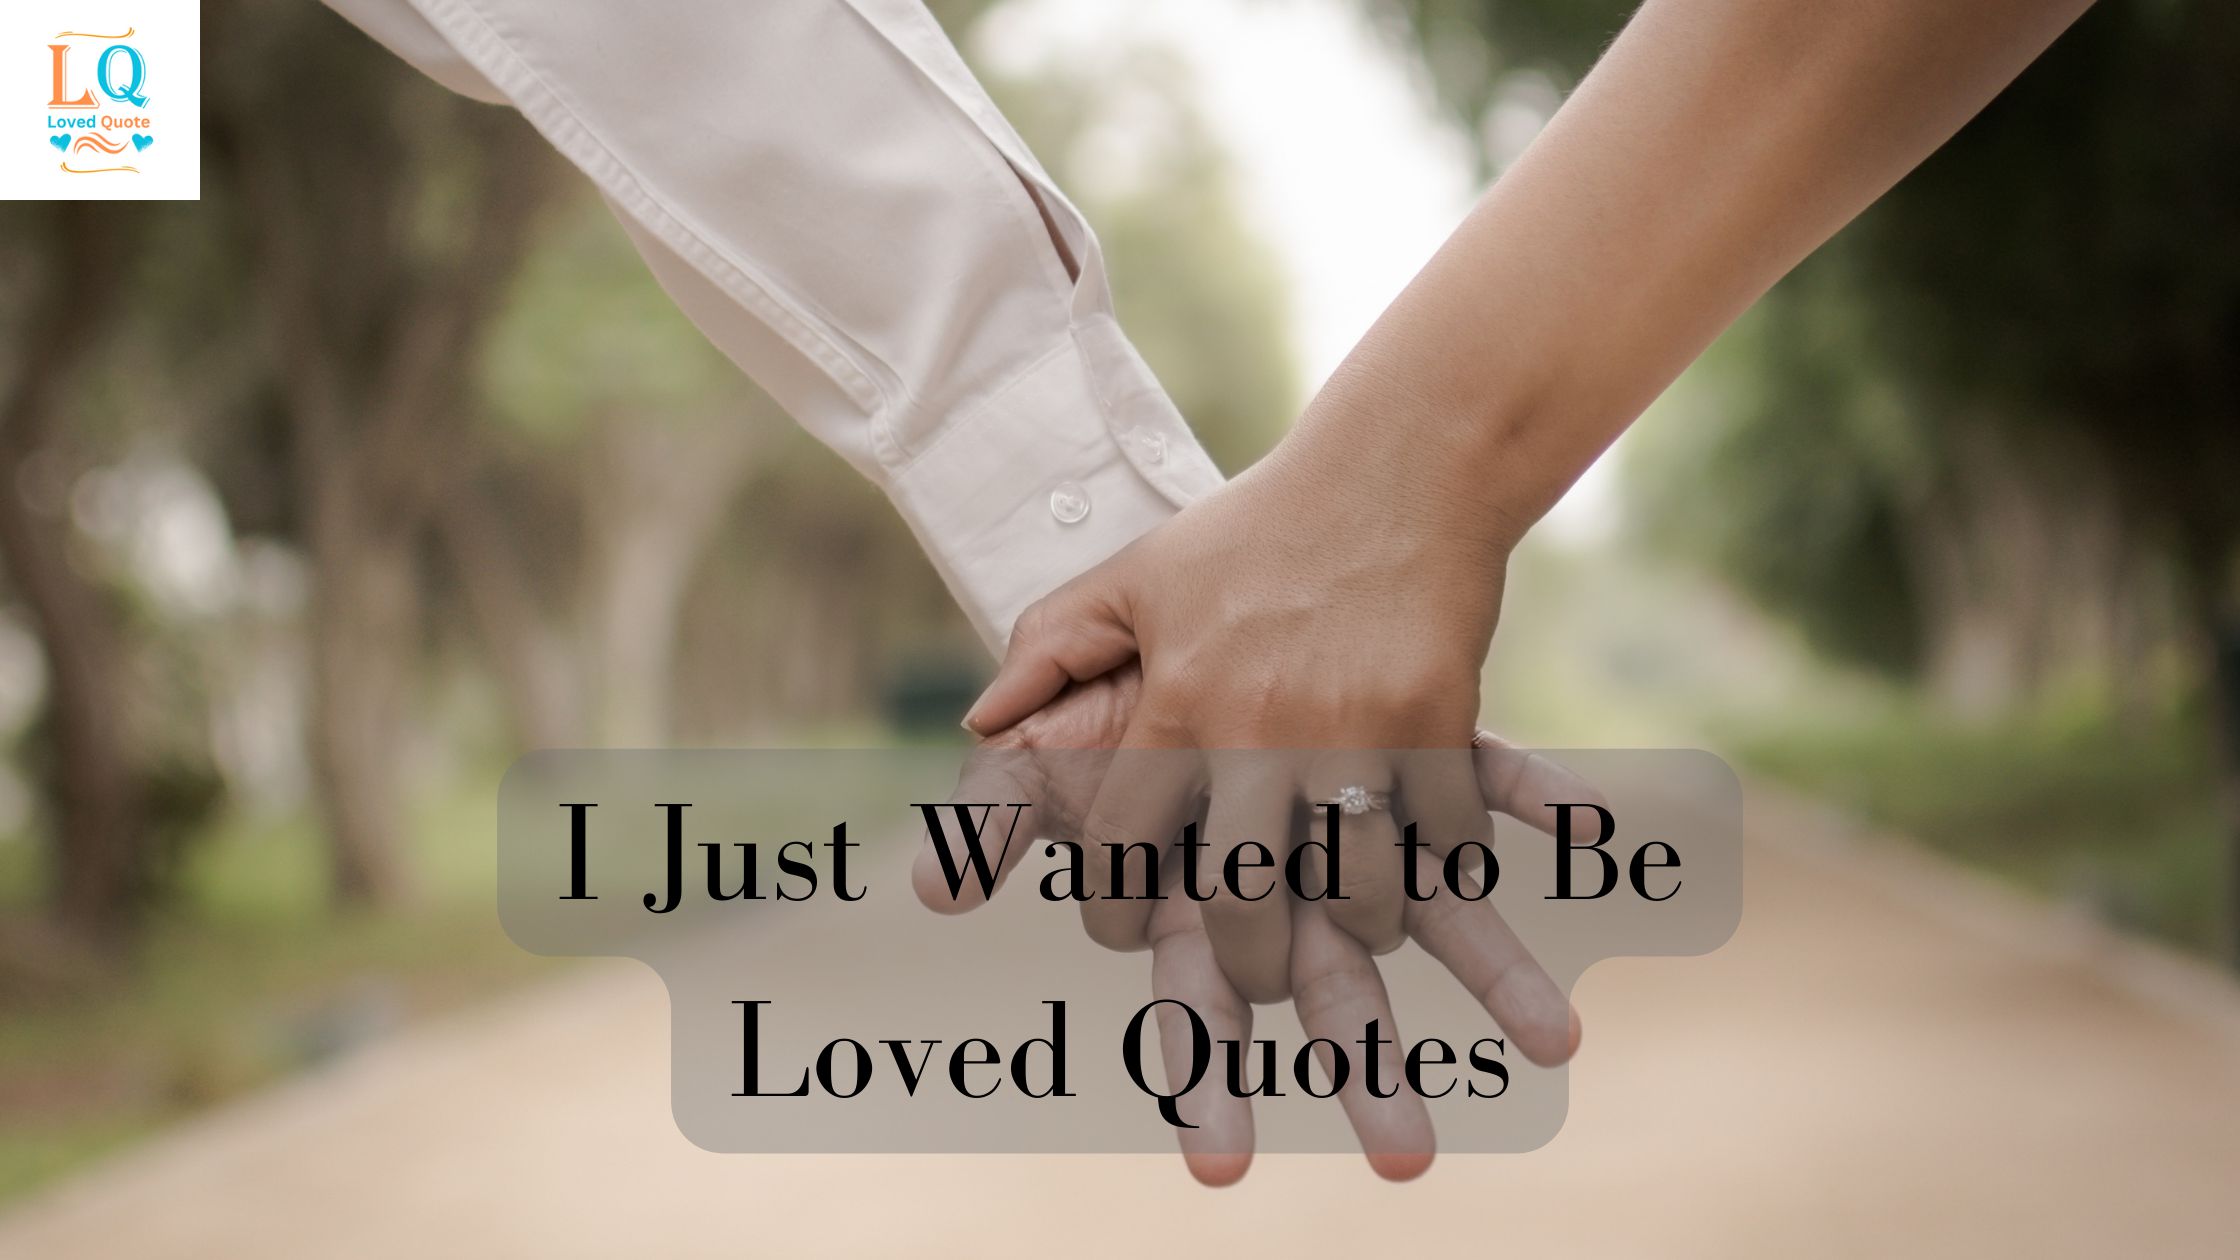 I Just Wanted to Be Loved Quotes (3)